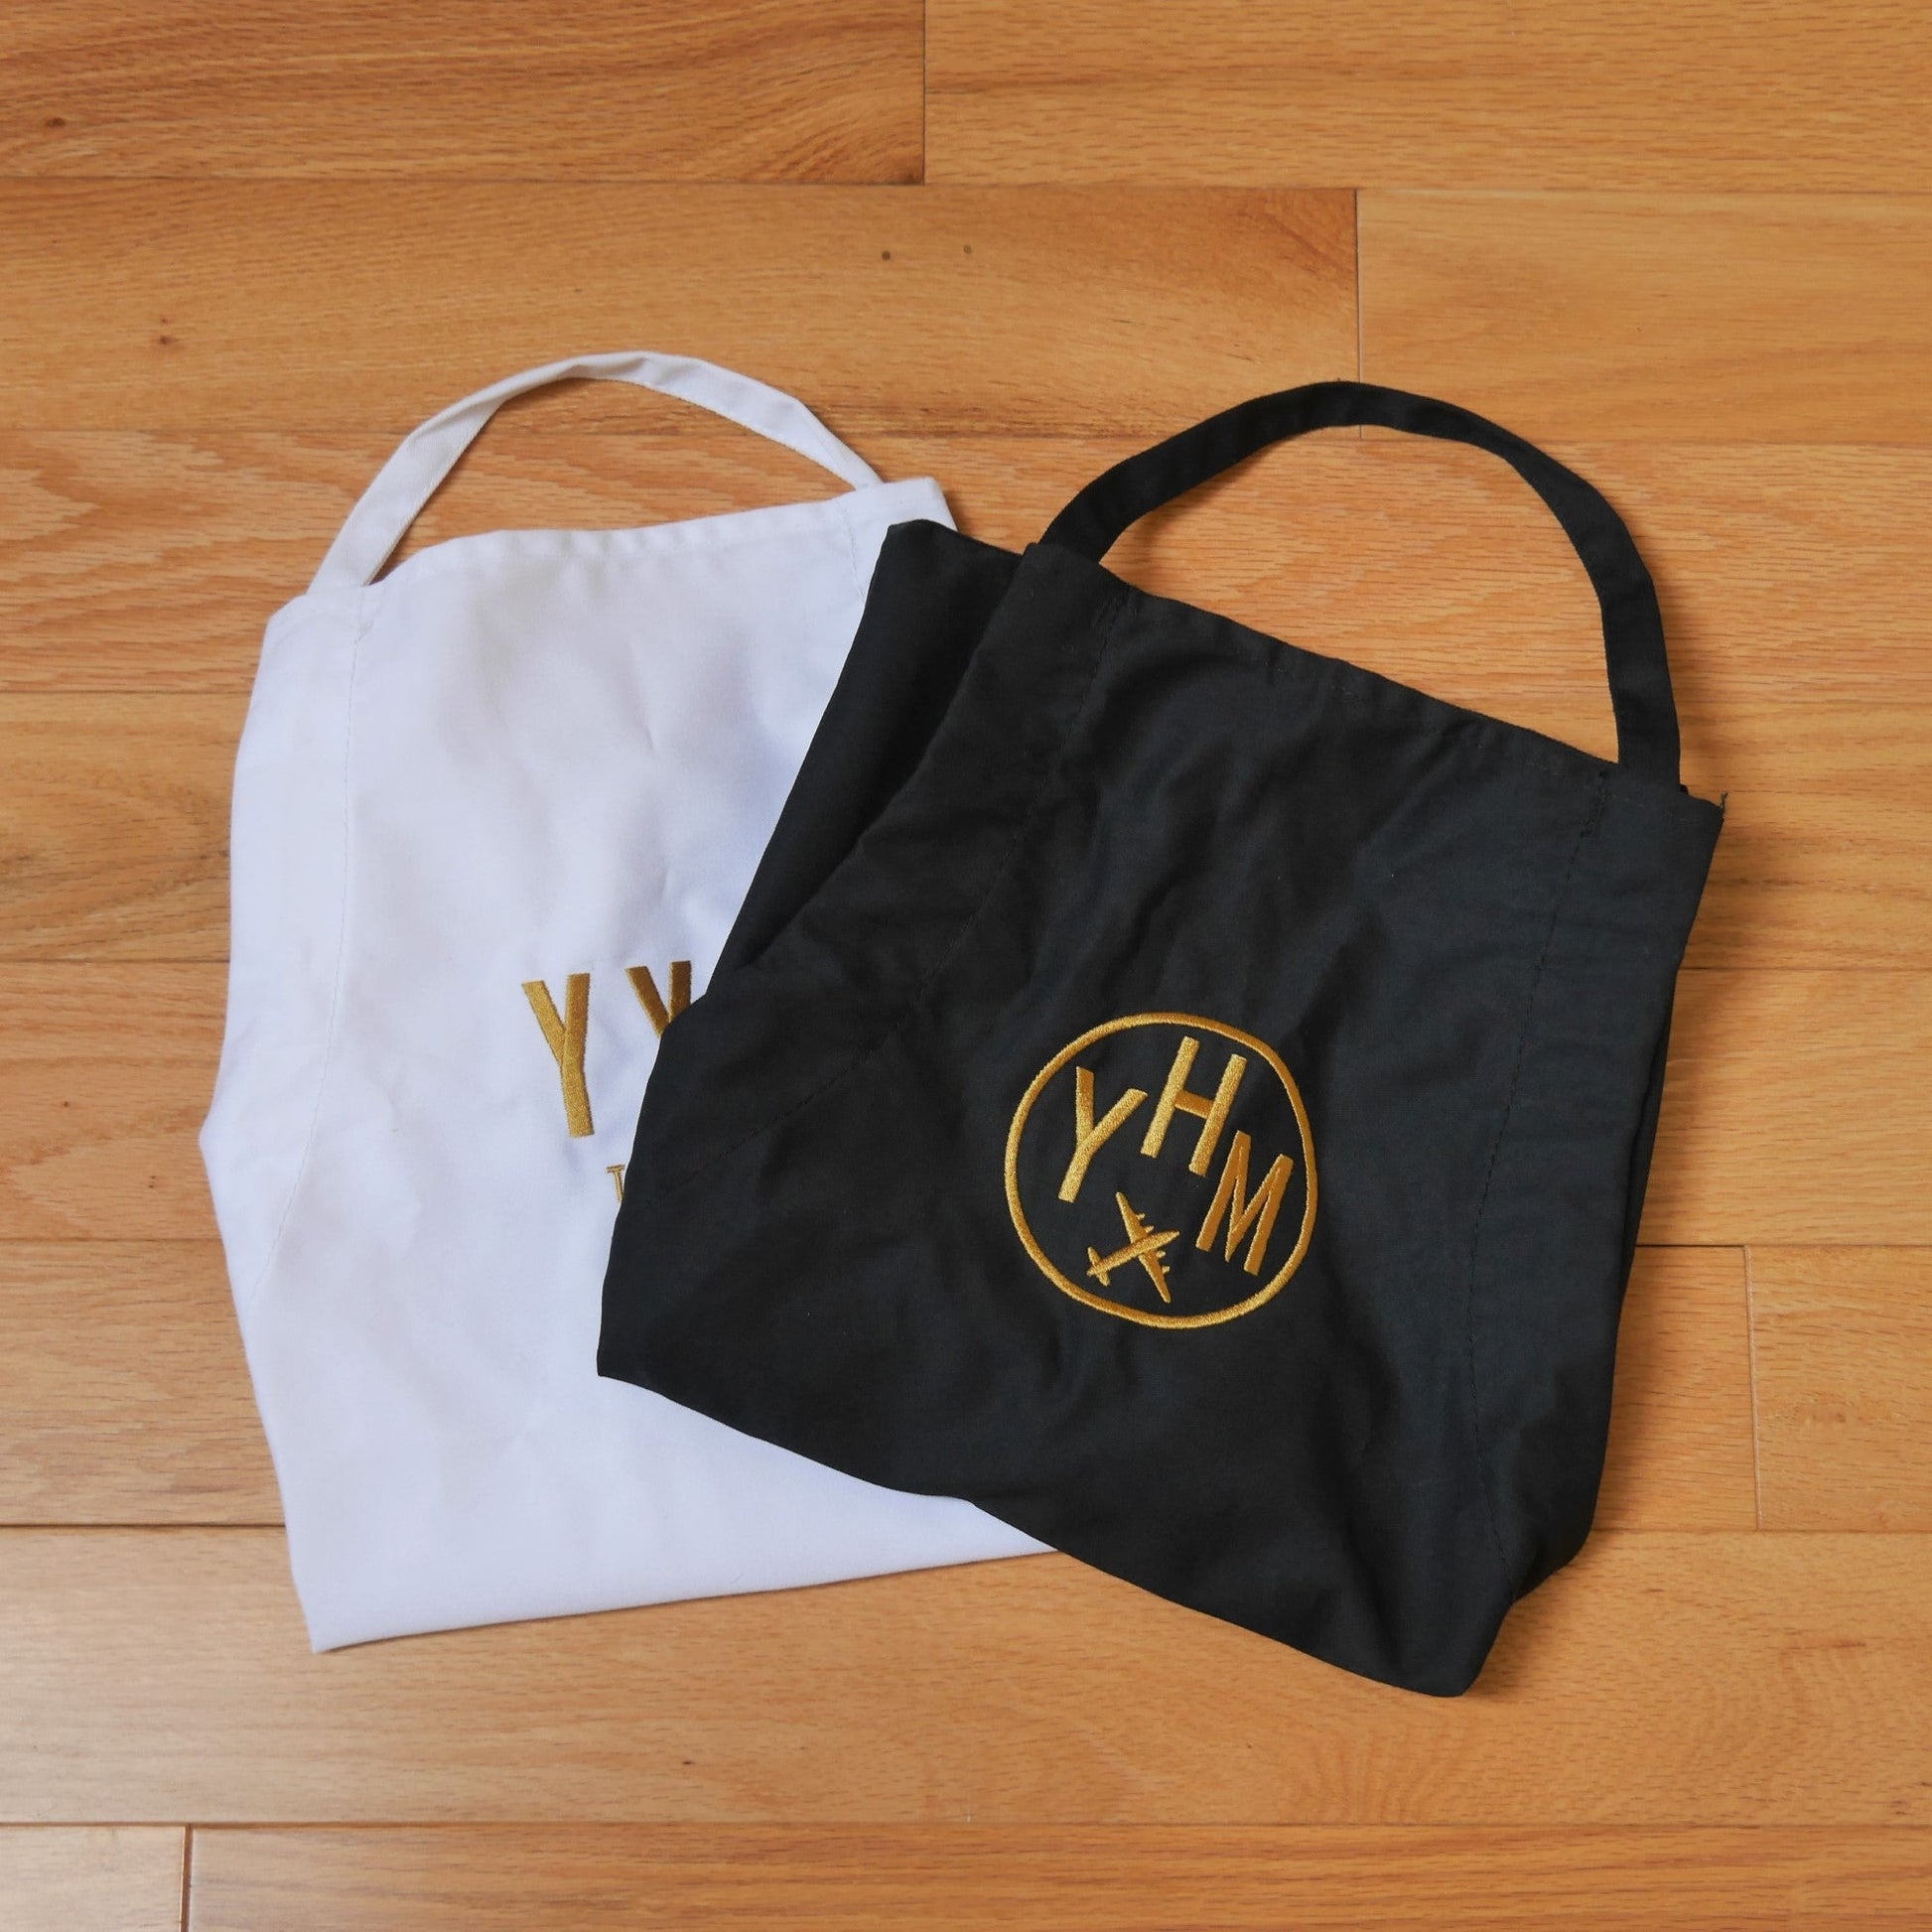 City Embroidered Apron - Old Gold • DUB Dublin • YHM Designs - Image 14